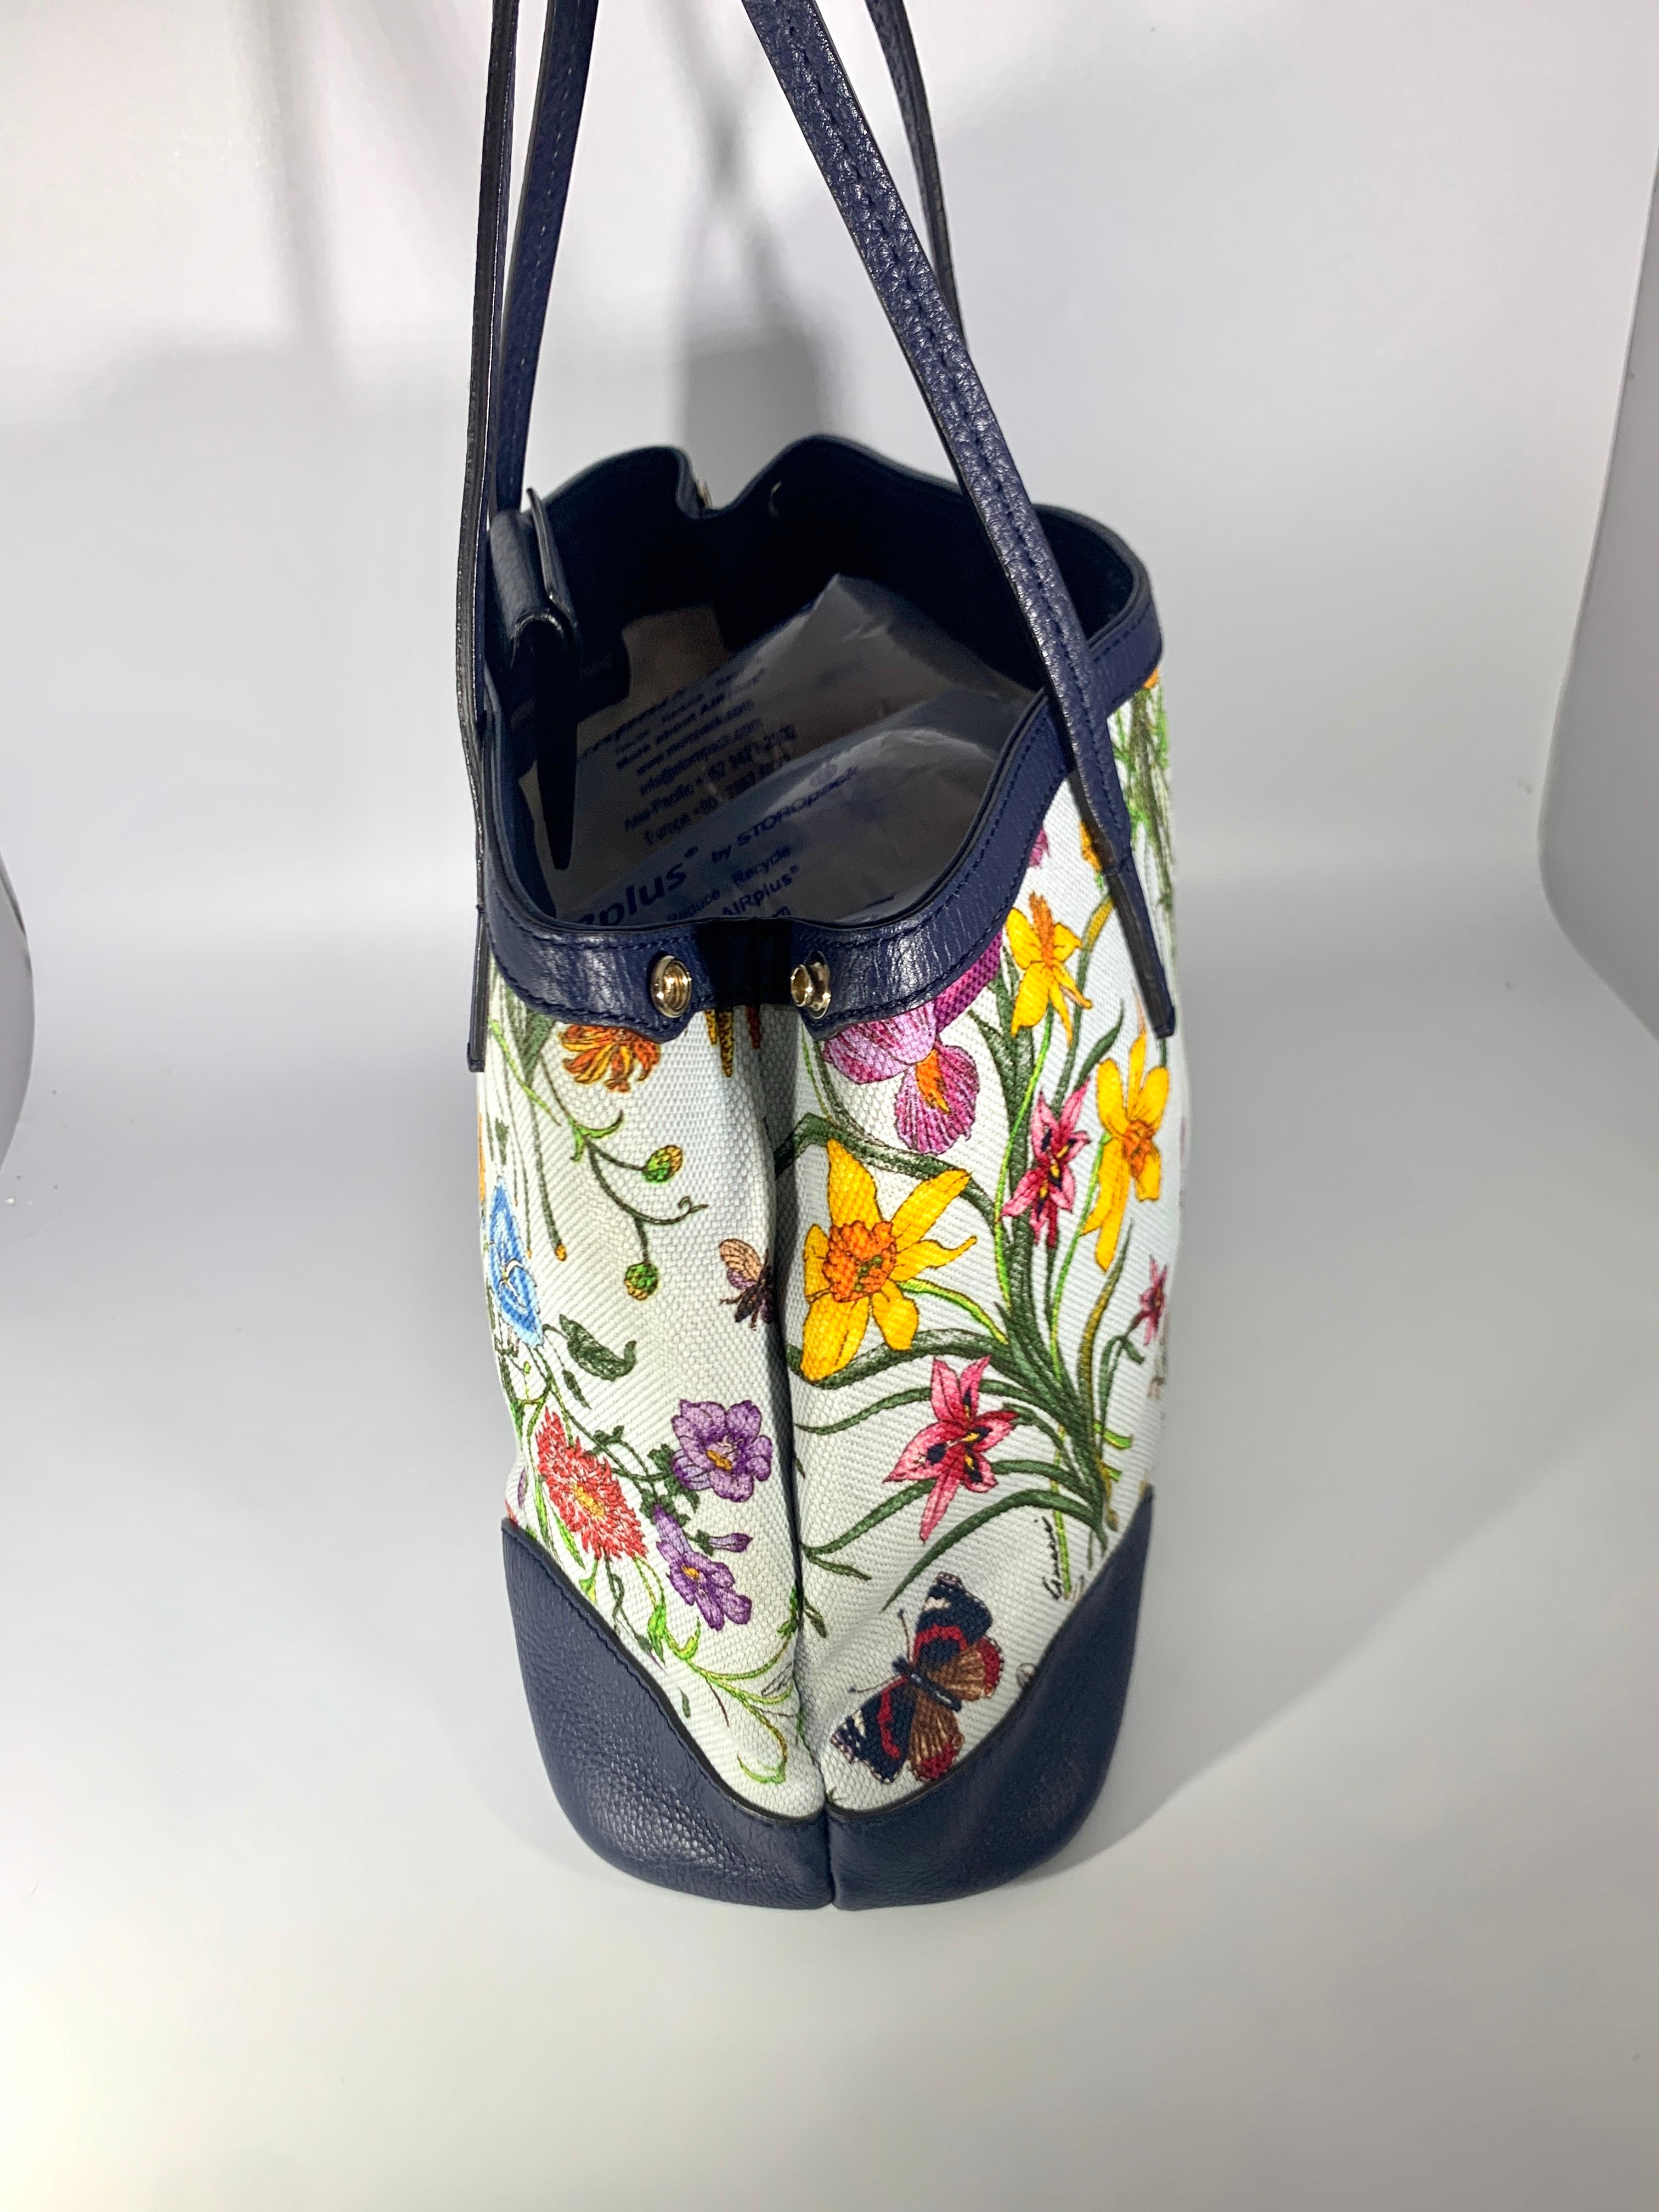  Gucci Flora Canvas Leather Trim Navy Blue With Flowers  Tote Handbag 1705189 1